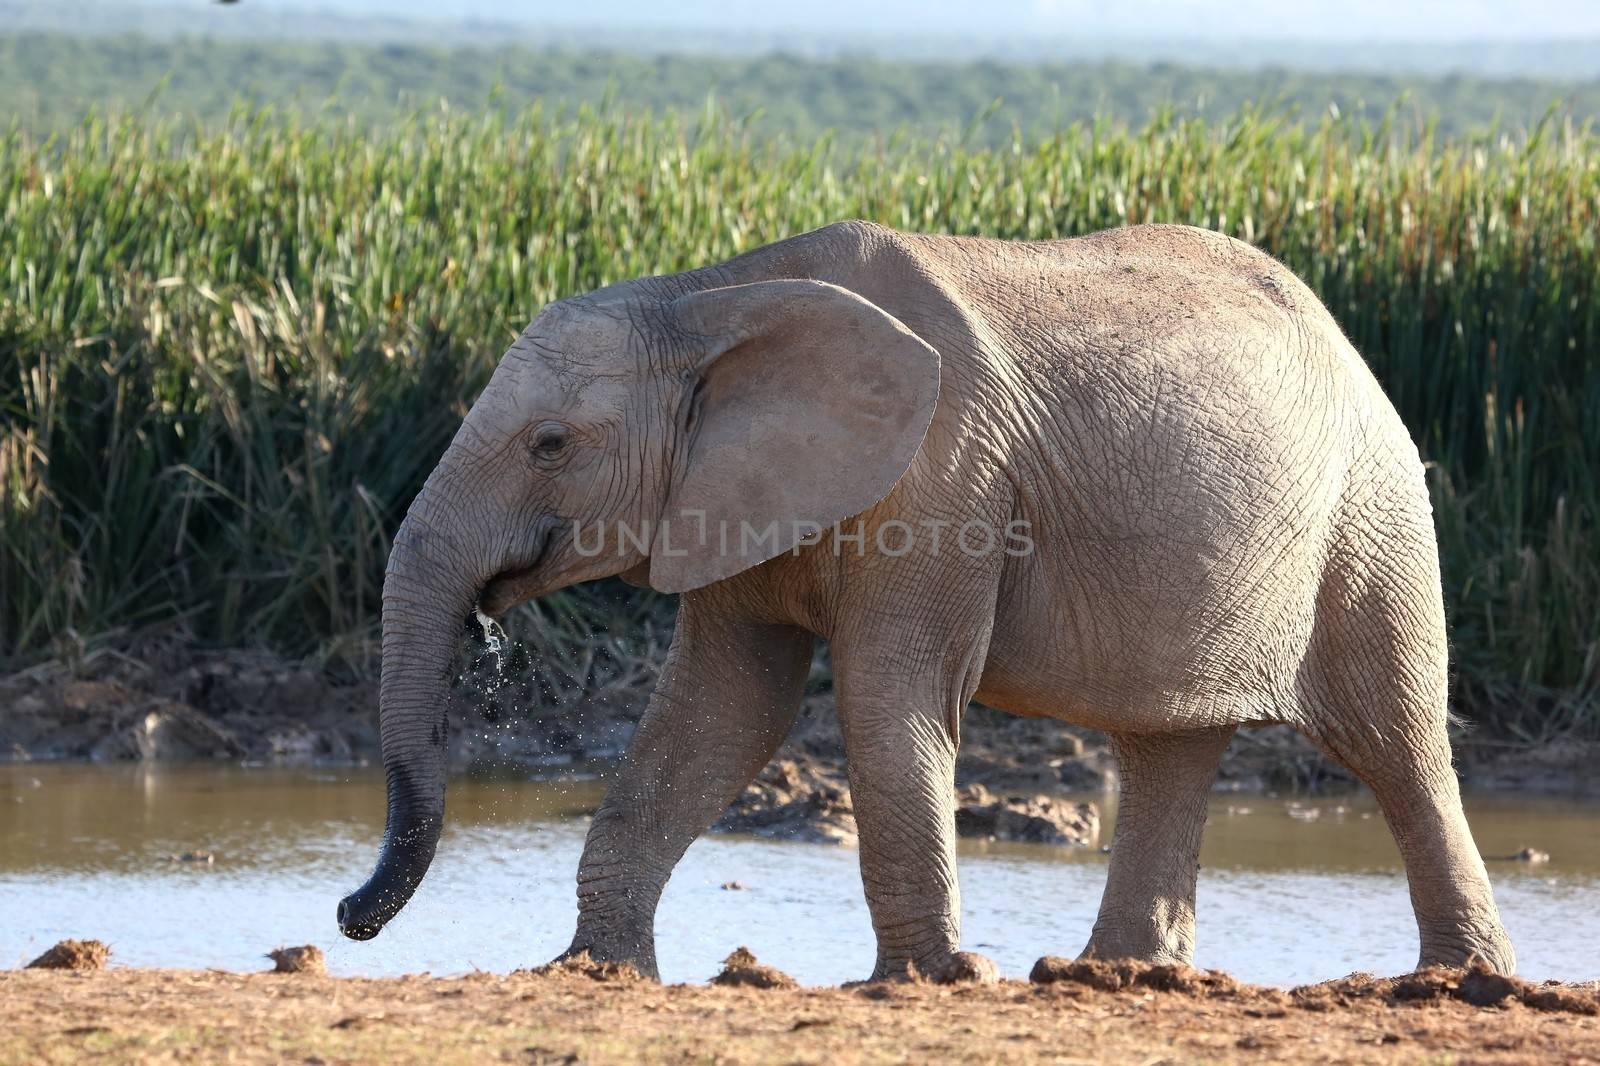 Female African elephant at a water hole